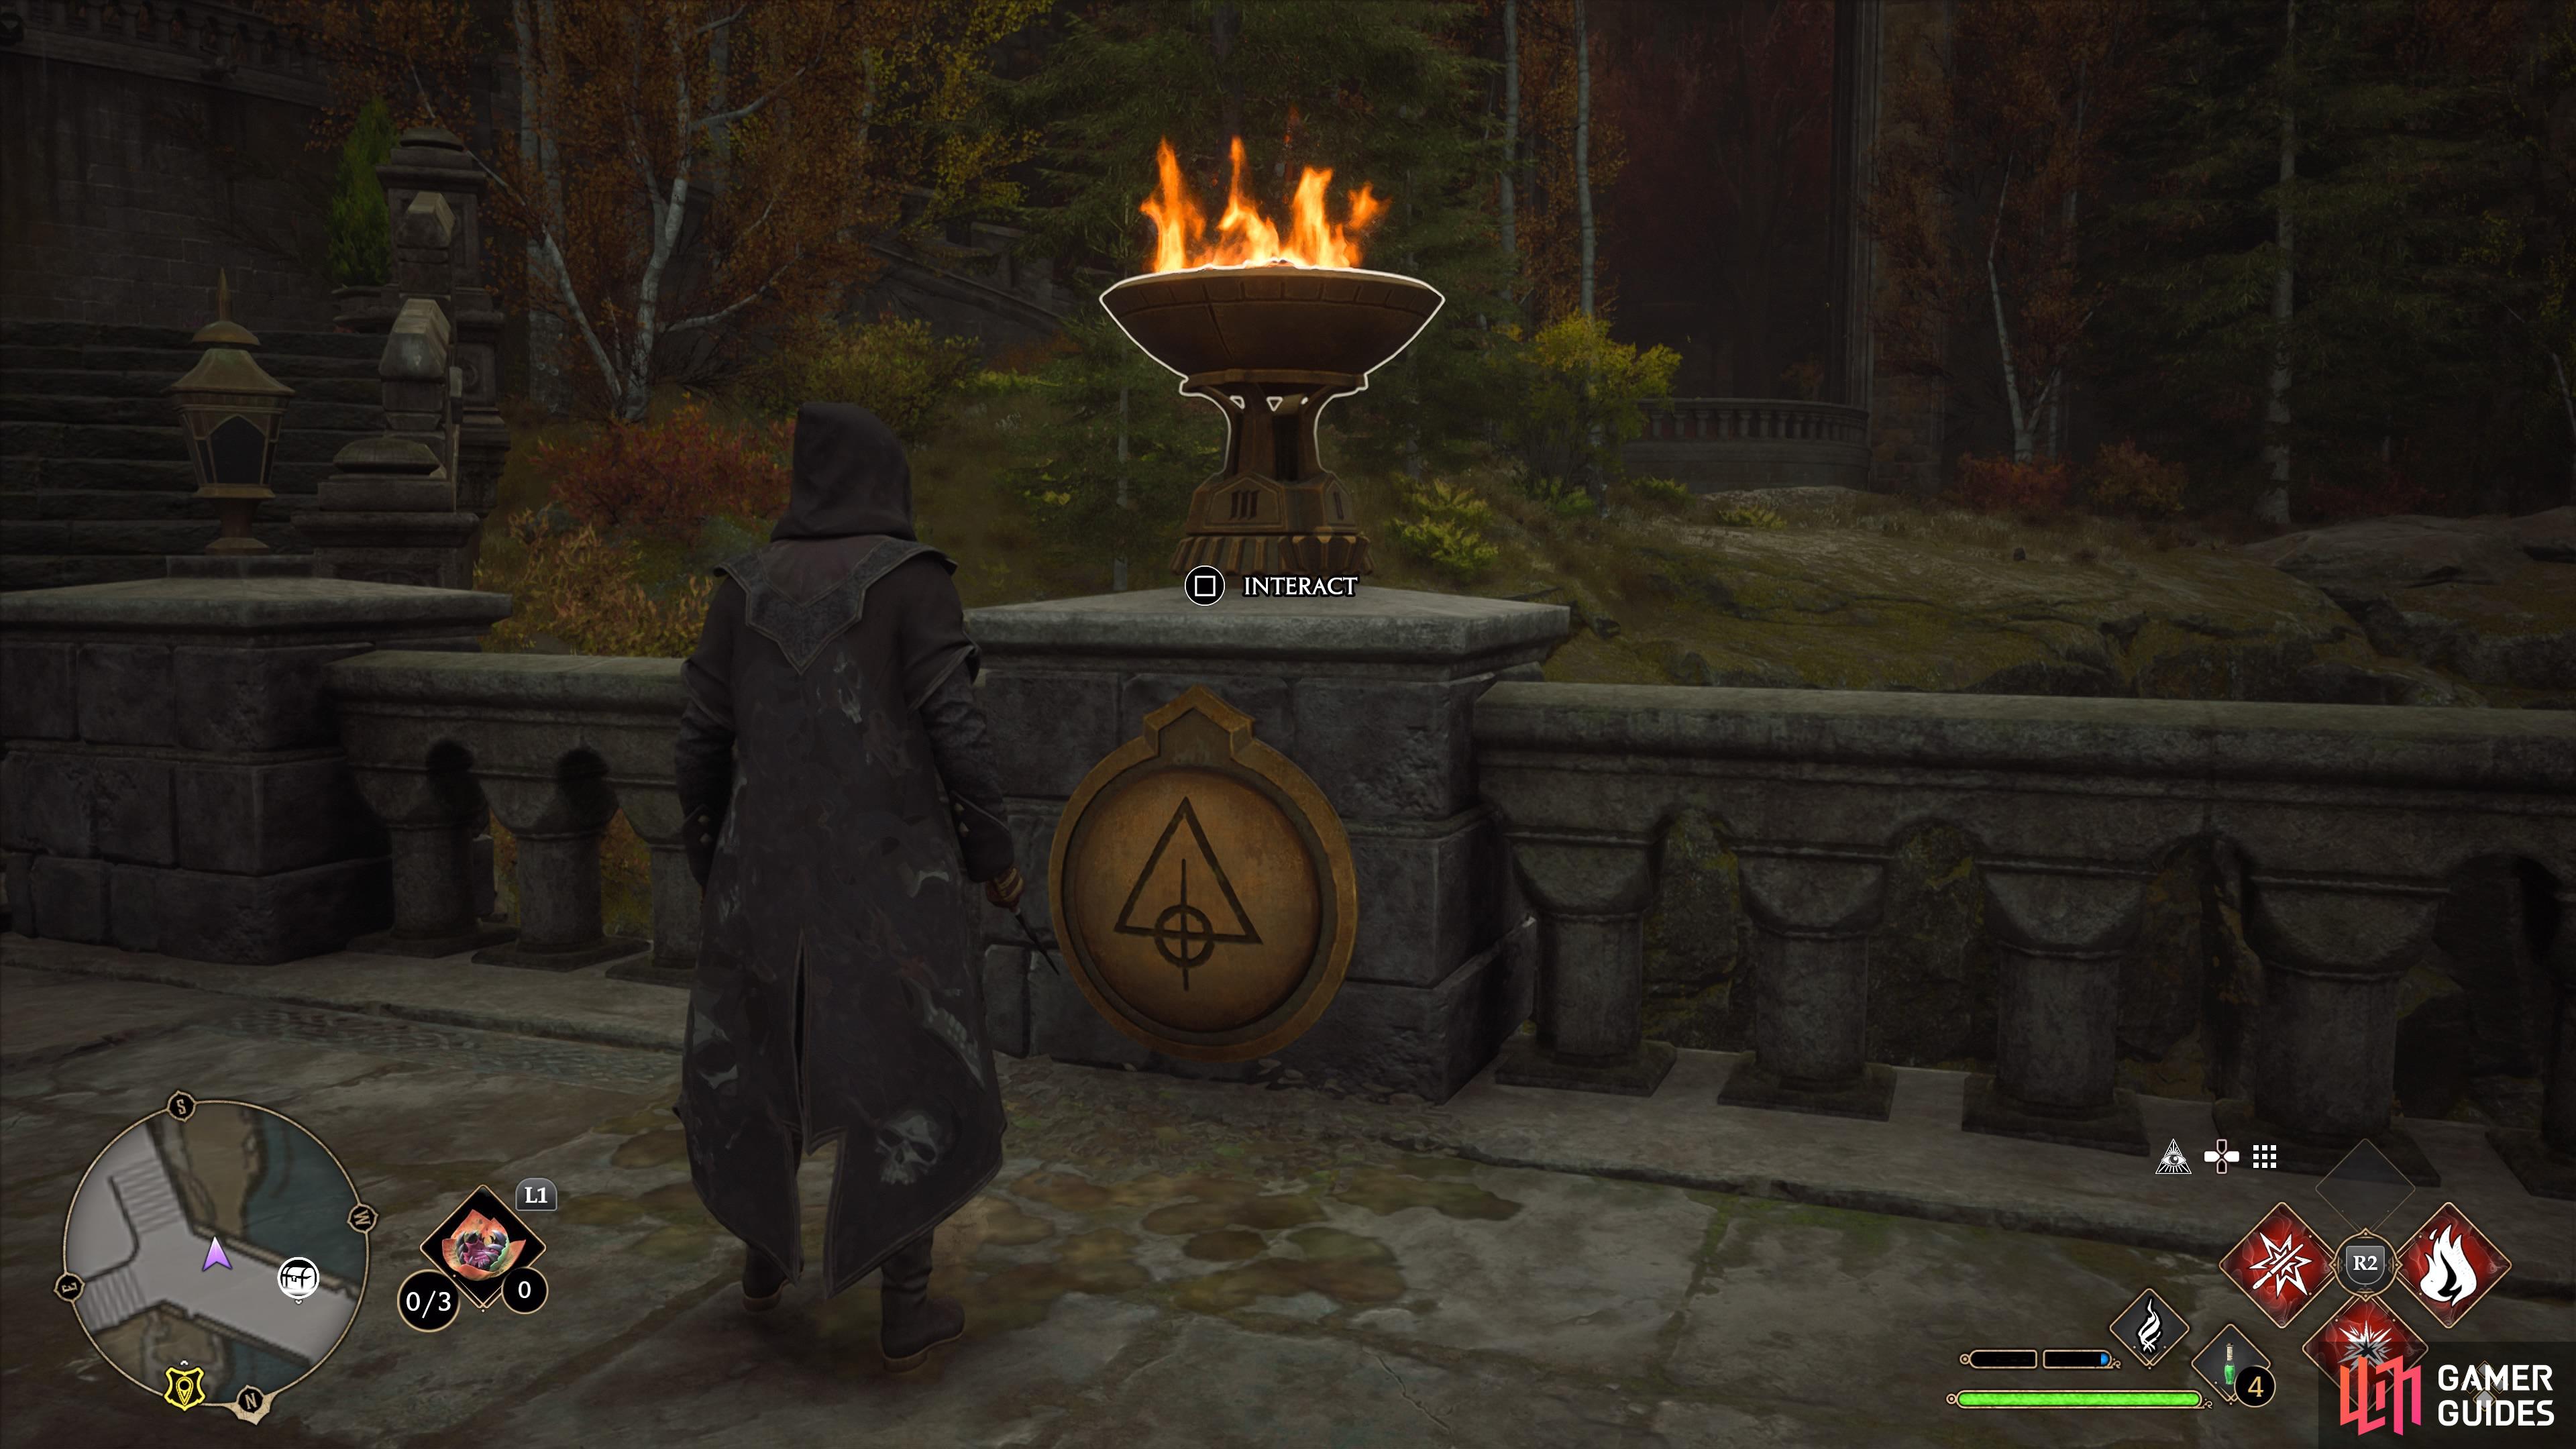 The third brazier that needs to be ignited